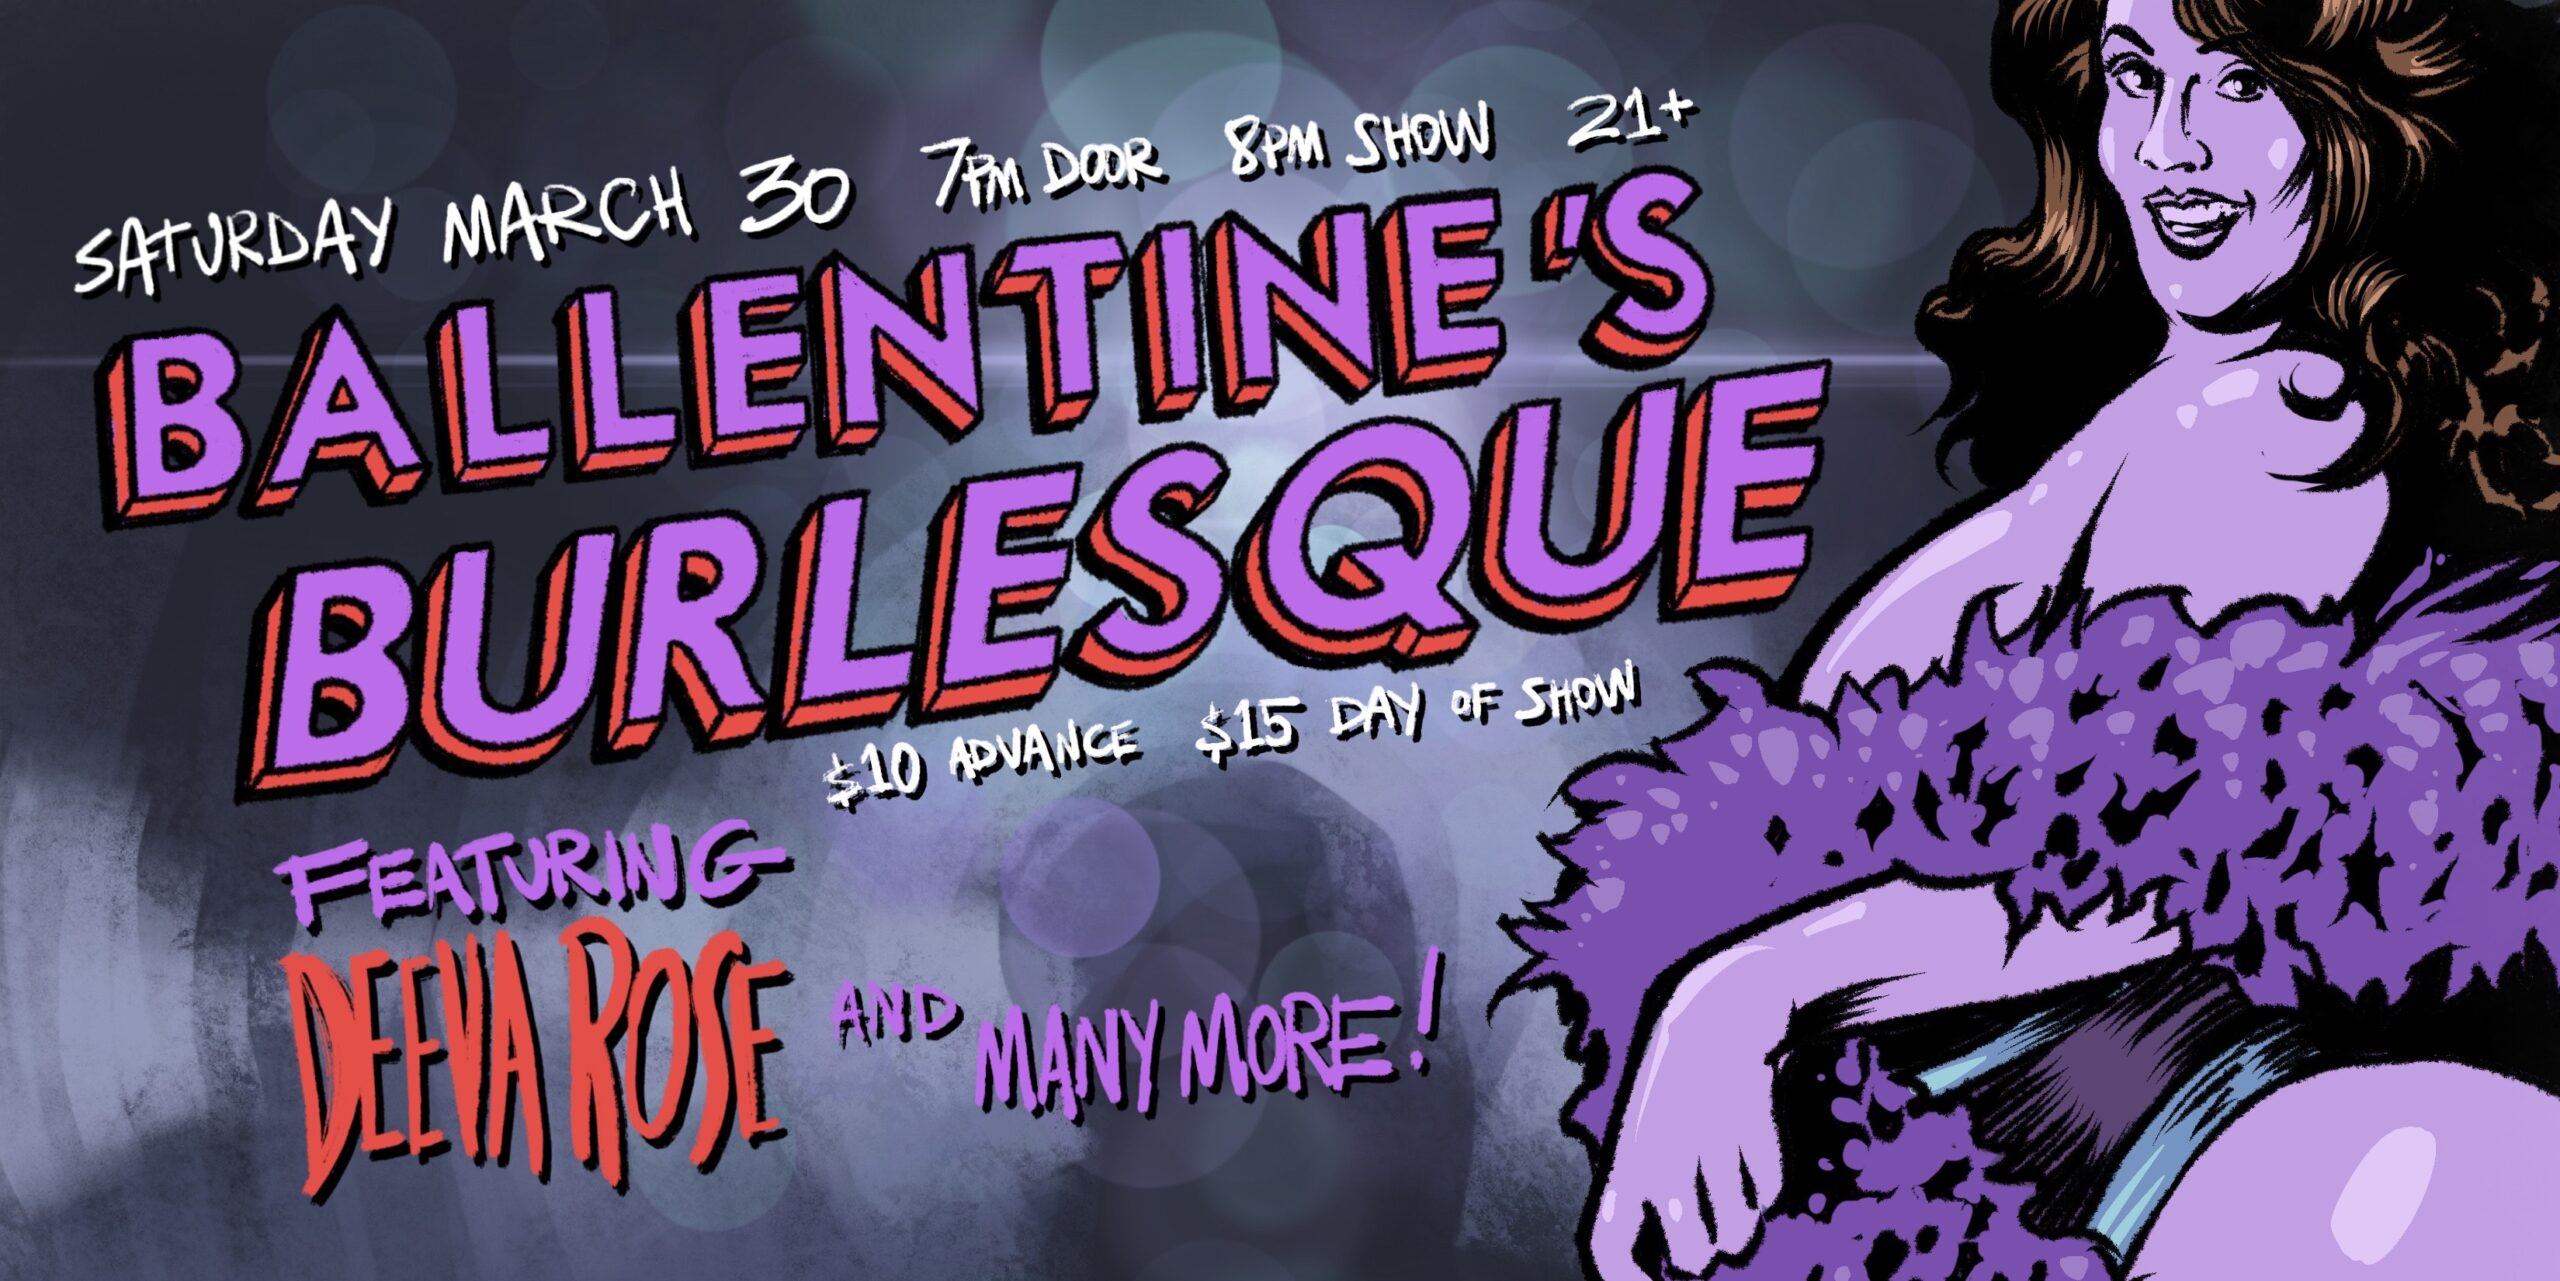 Ballentine's Burlesque Drag and Burlesque performances by Deeva Rose · Keke Boudreaux · Petty Treason · RipTyde · Chia · Nyk Rayzr · The Other Jeannie Retelle · P Funkus & more! Saturday, March 30 James Ballentine "Uptown" VFW Post 246 Doors 7:00pm :: Show 8:00pm :: 21+ GA $10 ADV / $15 DOS NO REFUNDS Ticket On-Sale Now